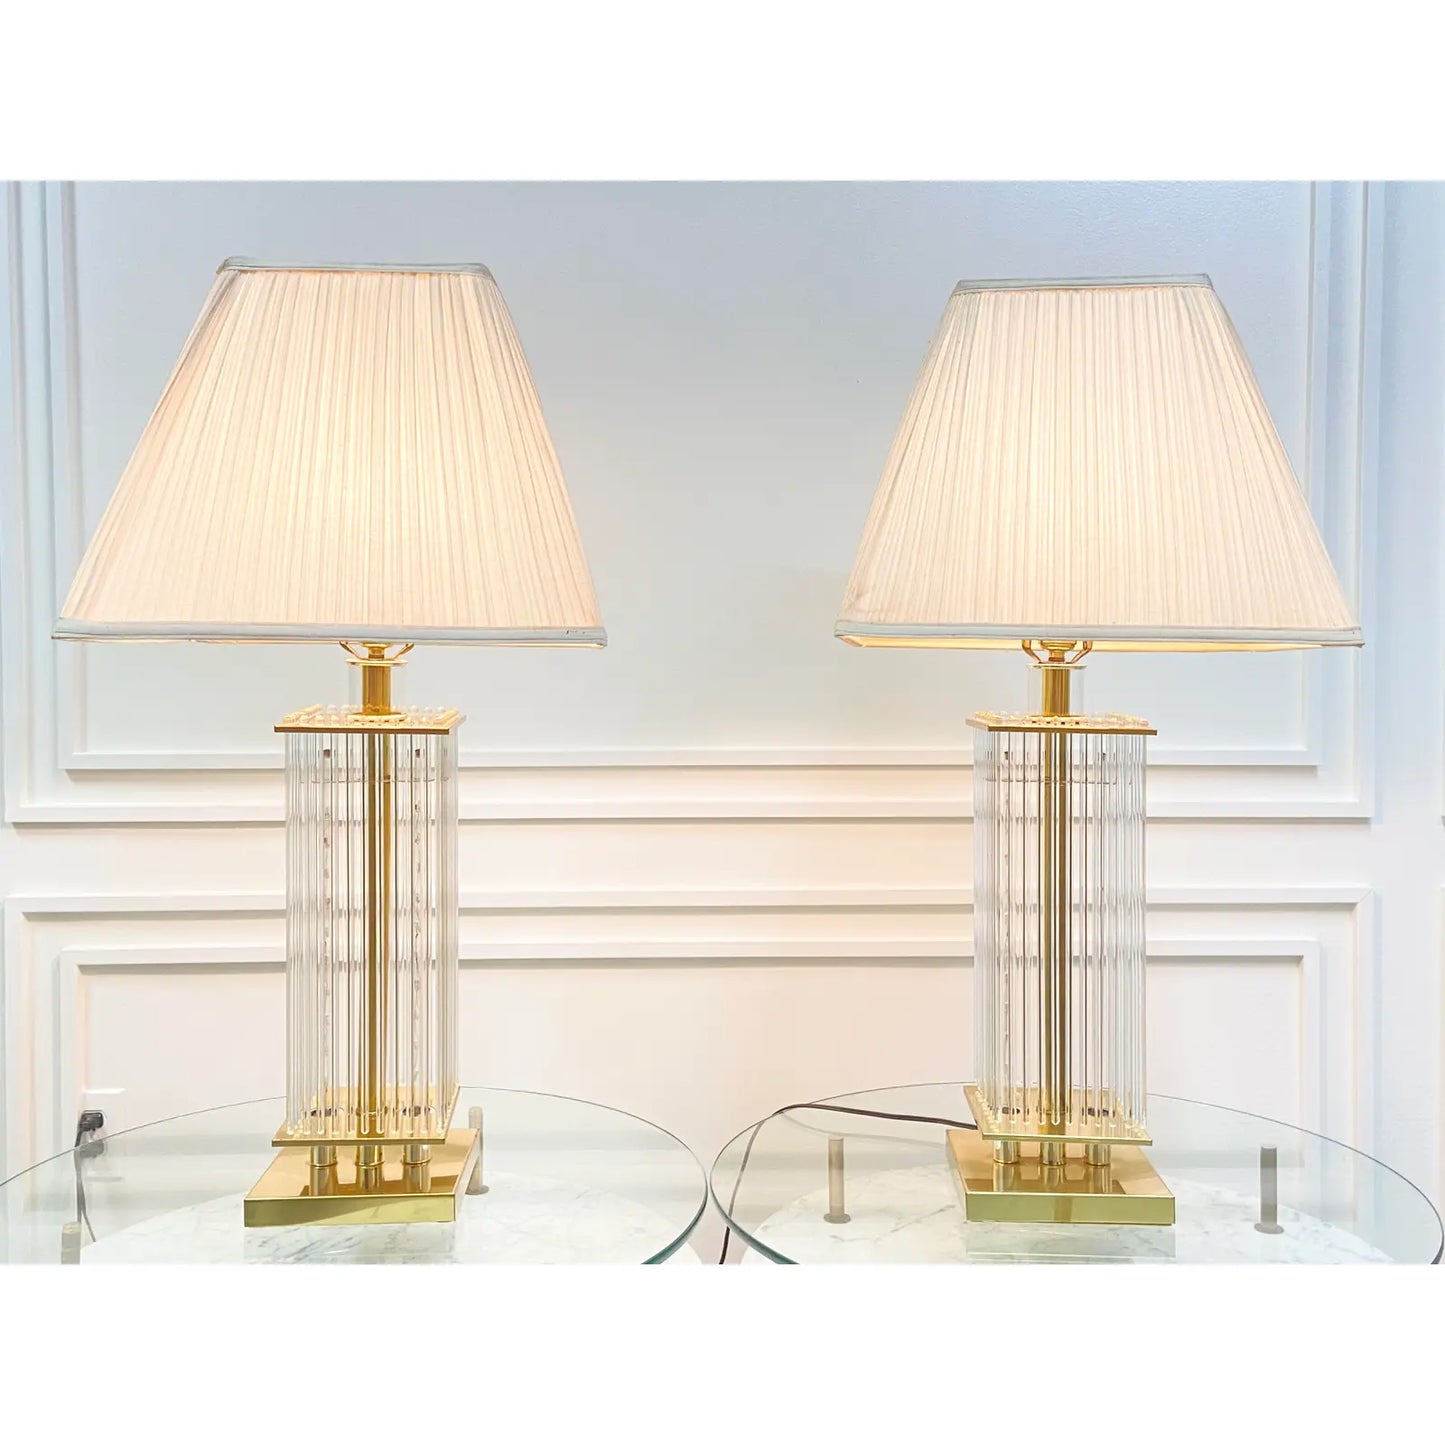 PAIR OF GLASS ROD & BRASS TABLE LAMPS BY LIGHT LINE